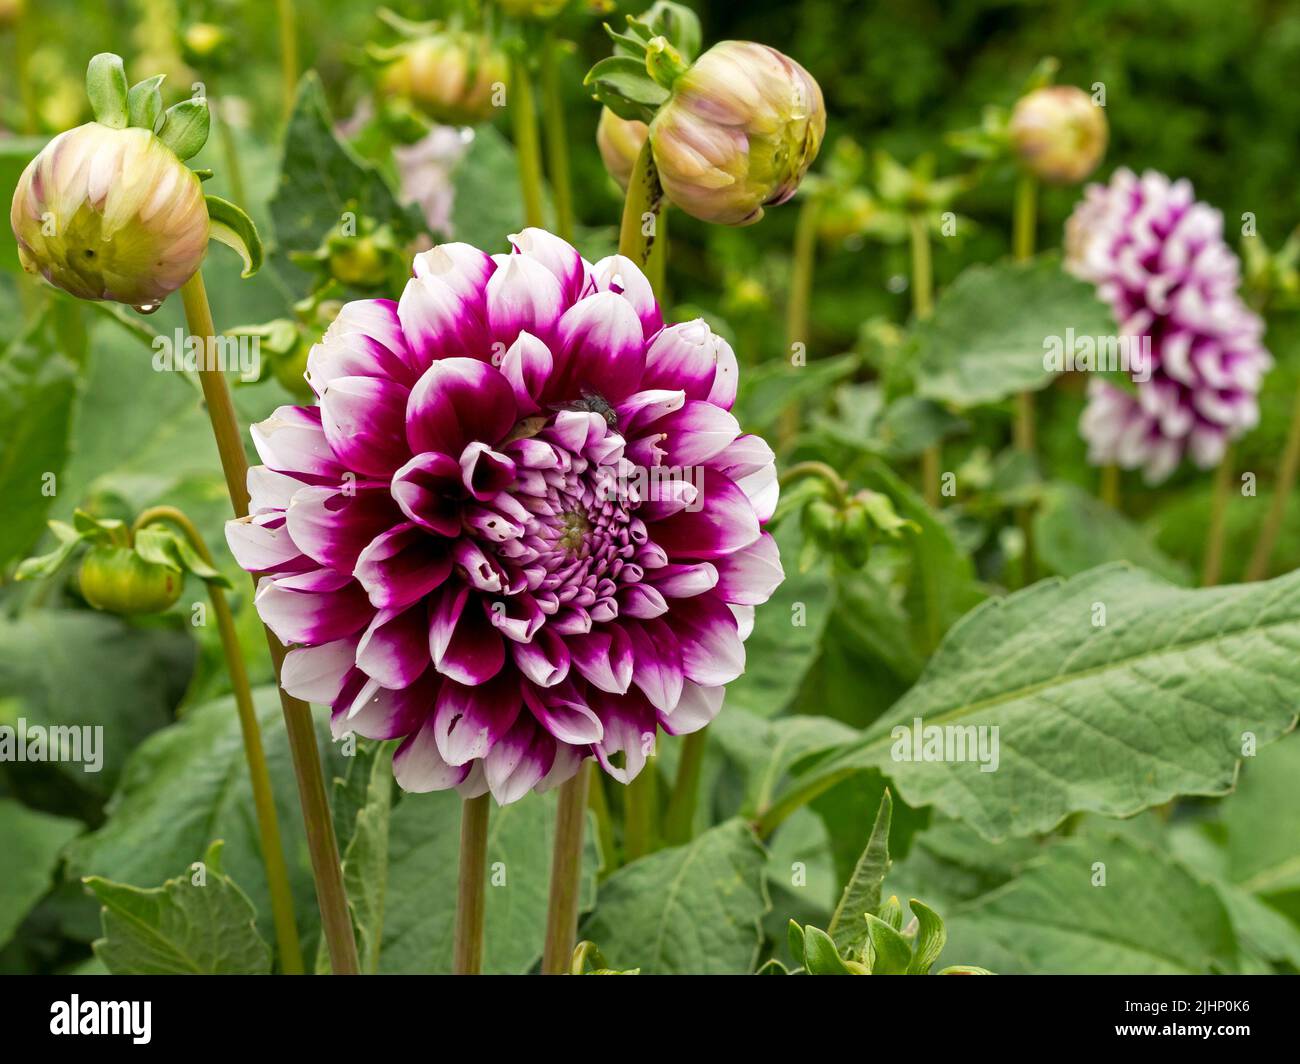 Pretty purple and pink Dahlia flower and buds in a garden Stock Photo